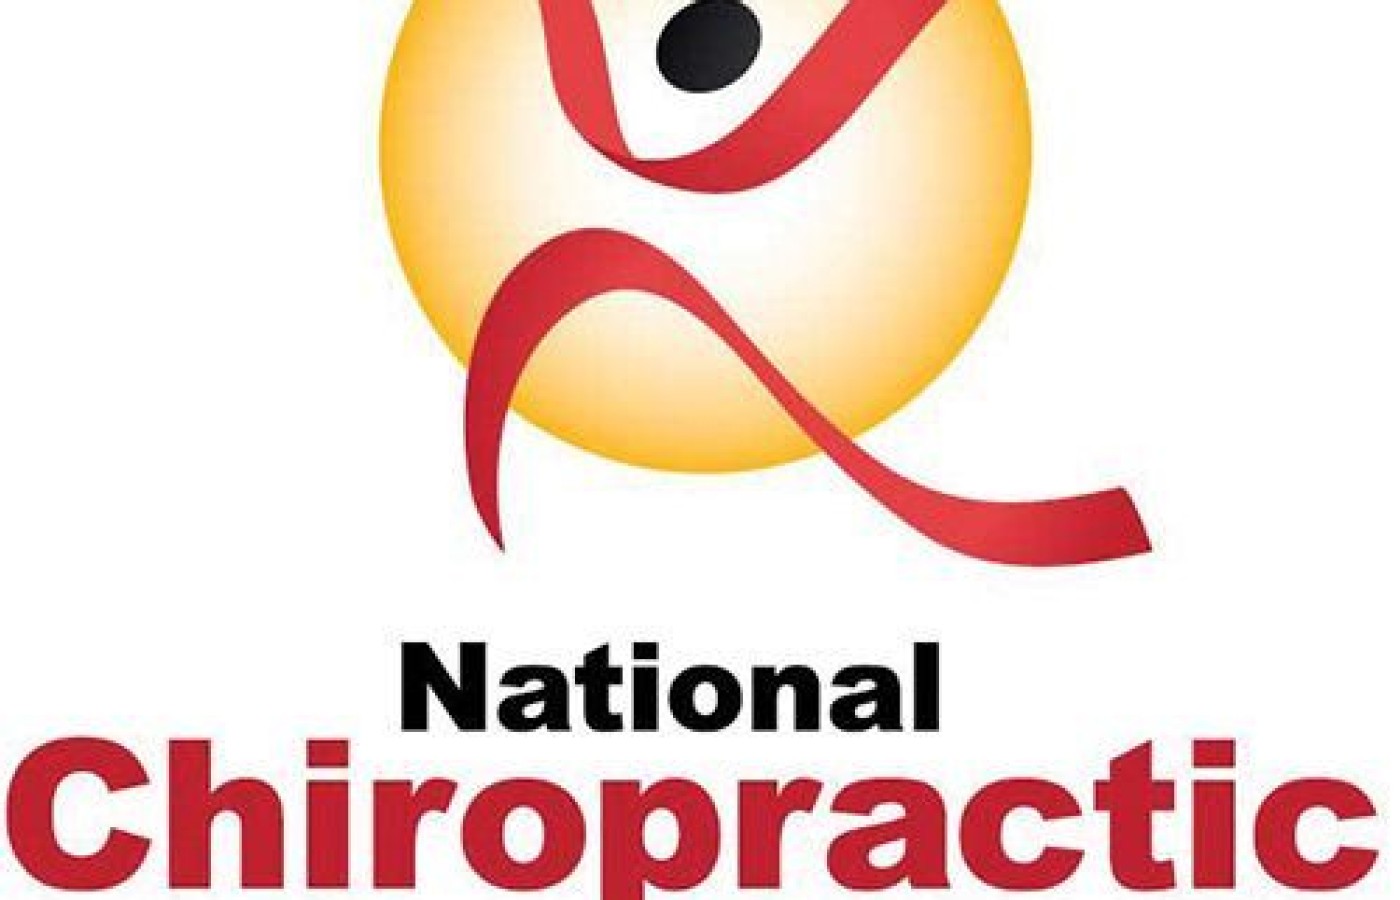 national chiropractic health month